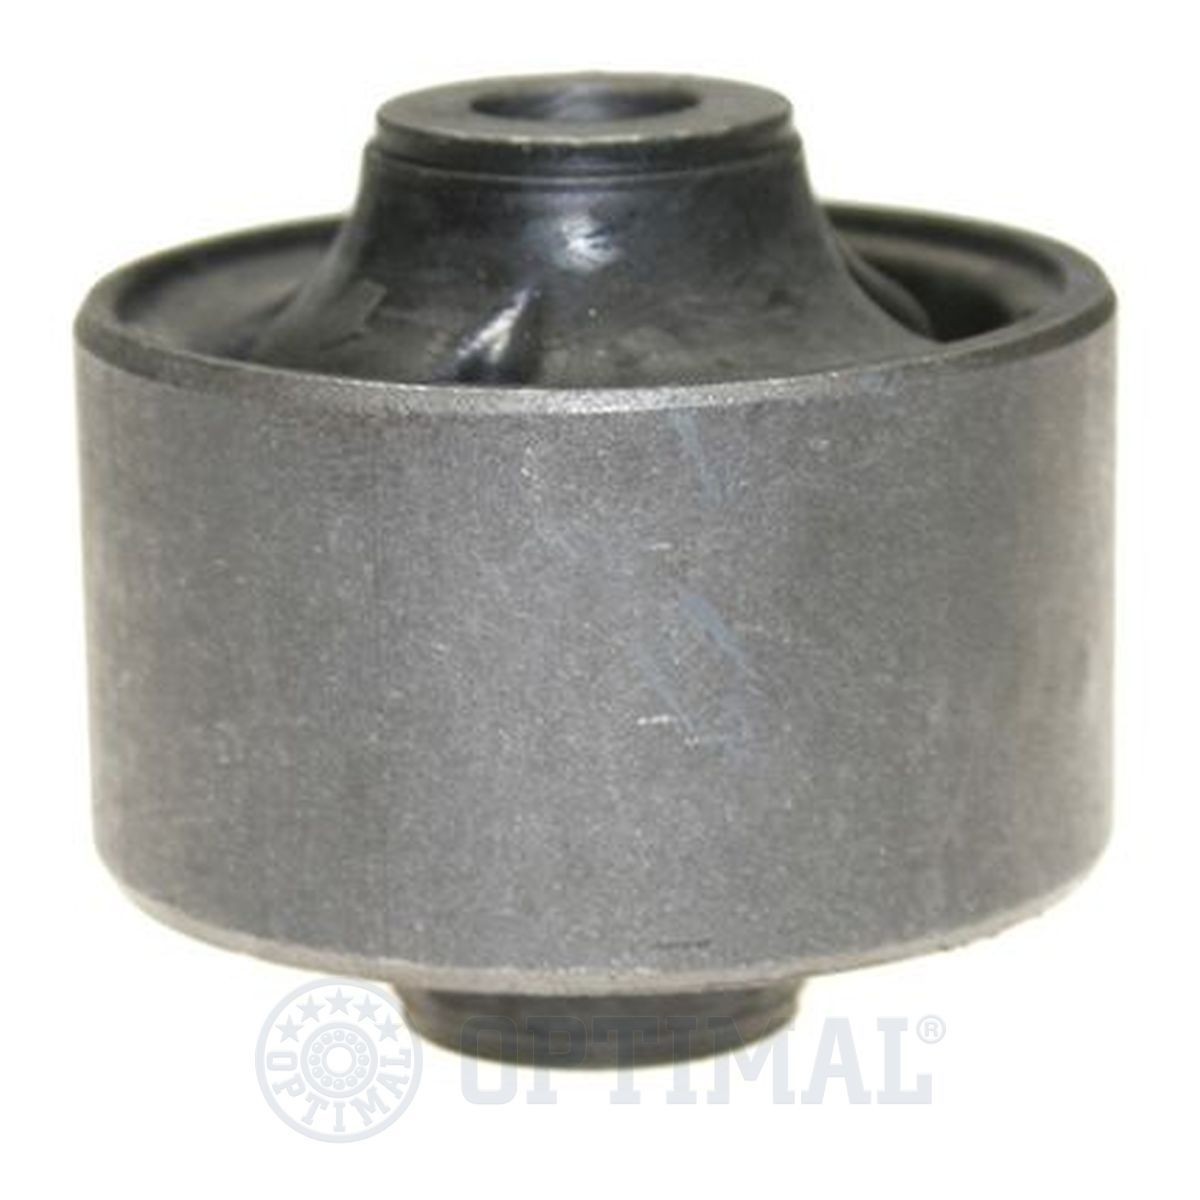 OPTIMAL Front, Front Axle, both sides, Rubber-Metal Mount, for control arm Arm Bush F8-6576 buy